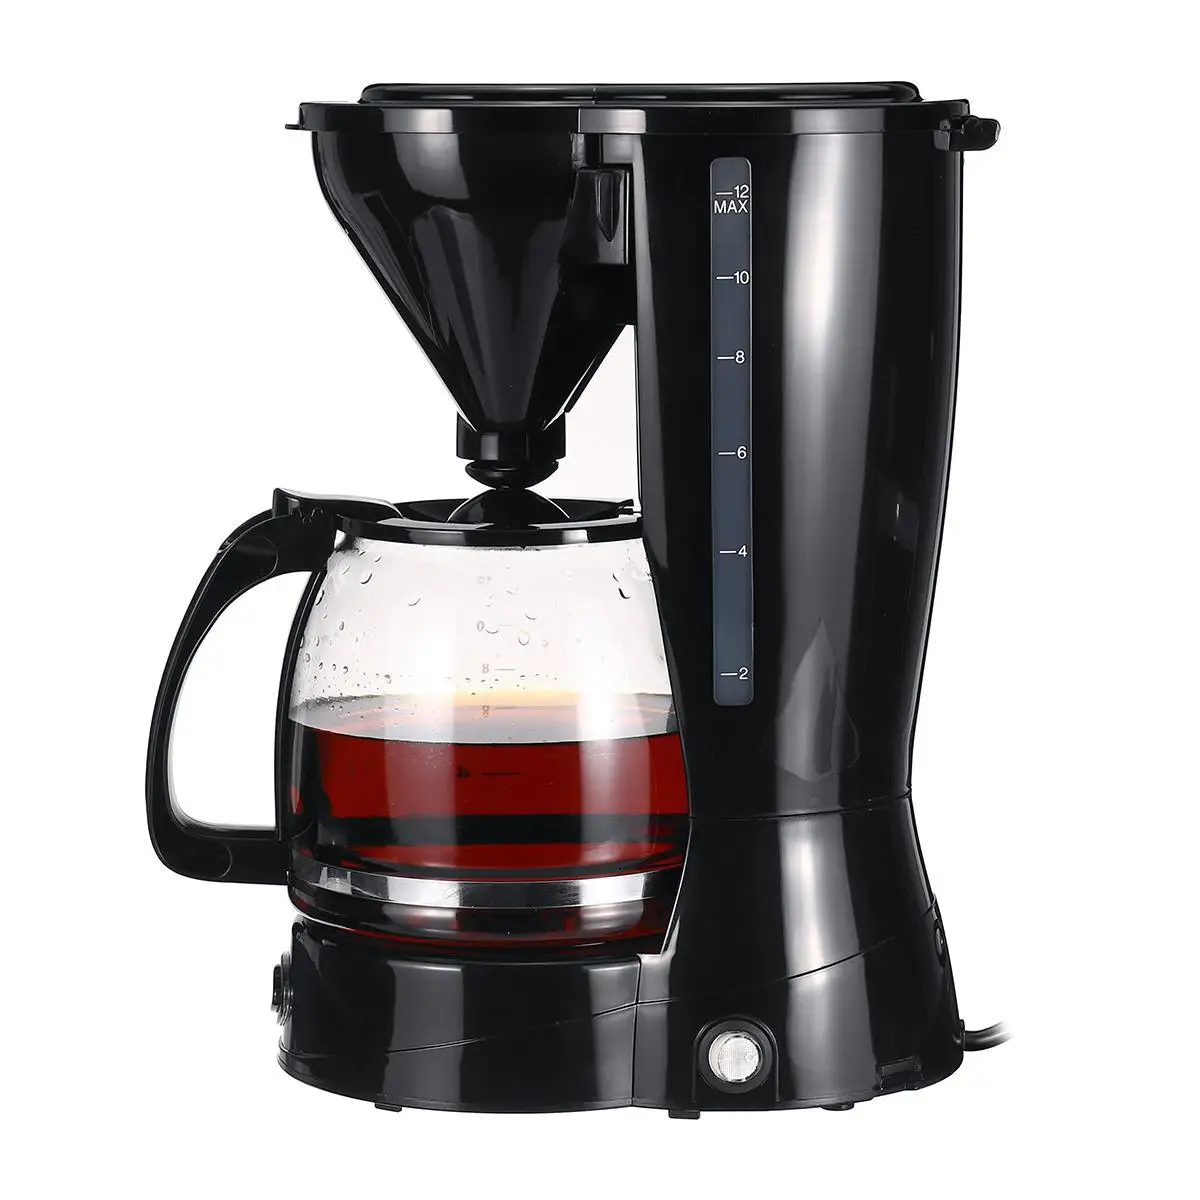 Multifunctional Coffee Machine Detachable Coffee Maker with Kettle Protective Espresso Maker Mini Drip Coffee Maker risenke 2 pin walkie talkie earpiece with ptt mic detachable cable to 3 5mm audio headset for kenwood bao feng two way radio